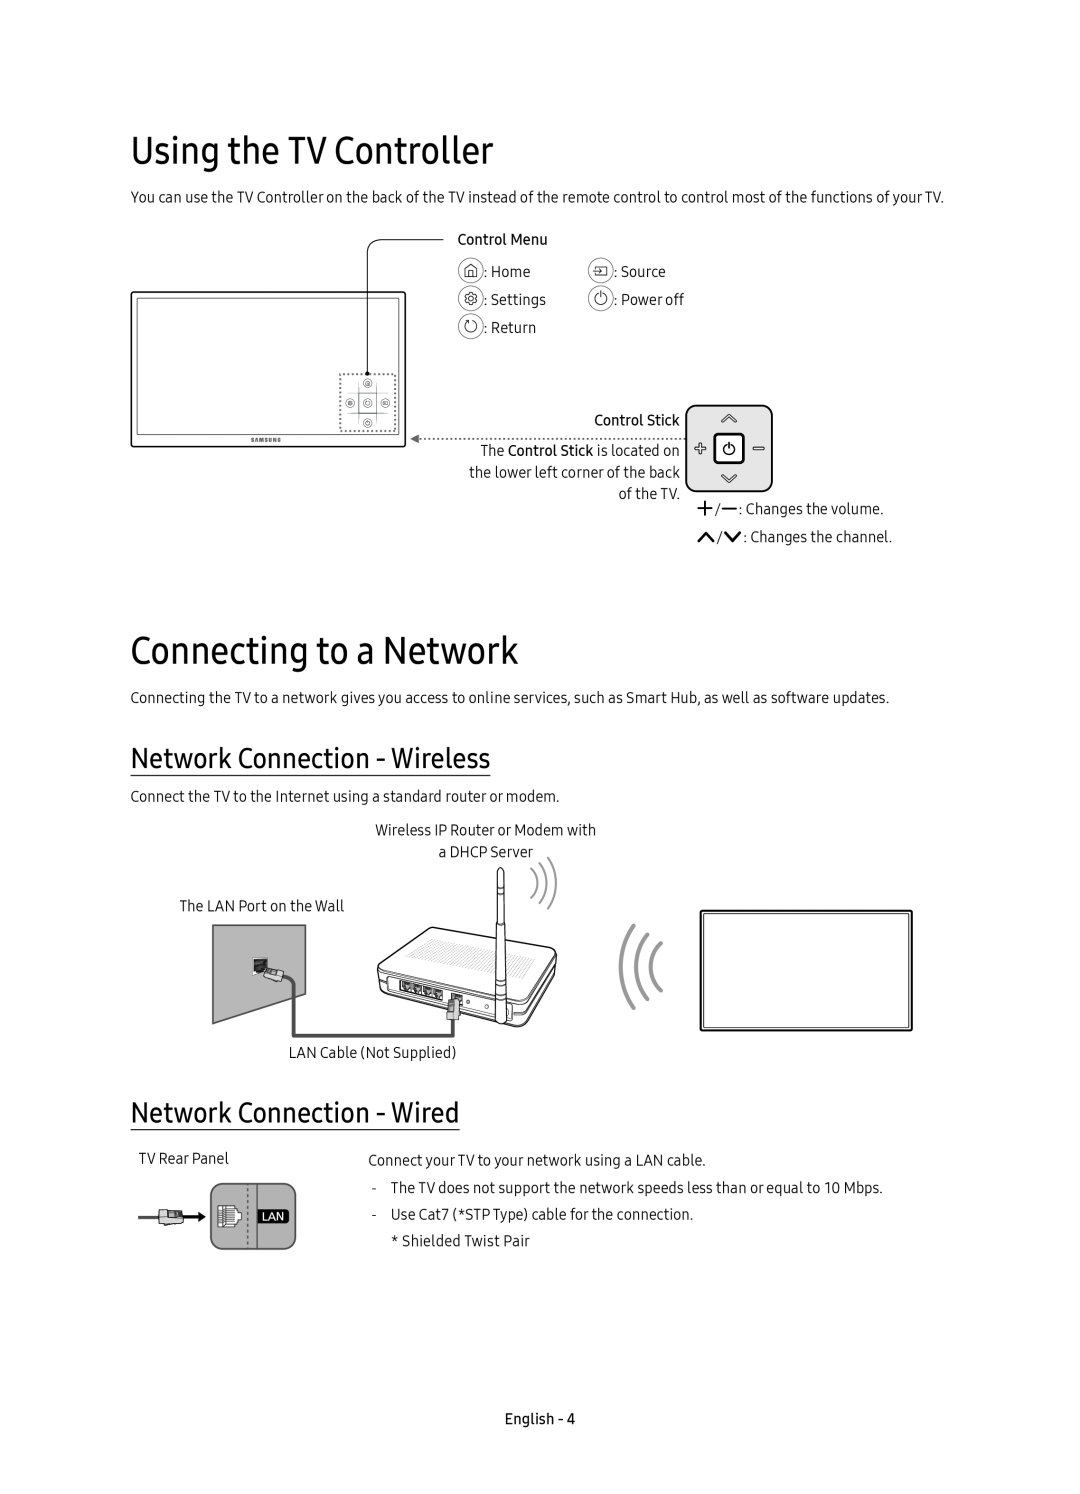 Samsung UE60KU6079UXZG manual Using the TV Controller, Connecting to a Network, Network Connection - Wireless, Control Menu 